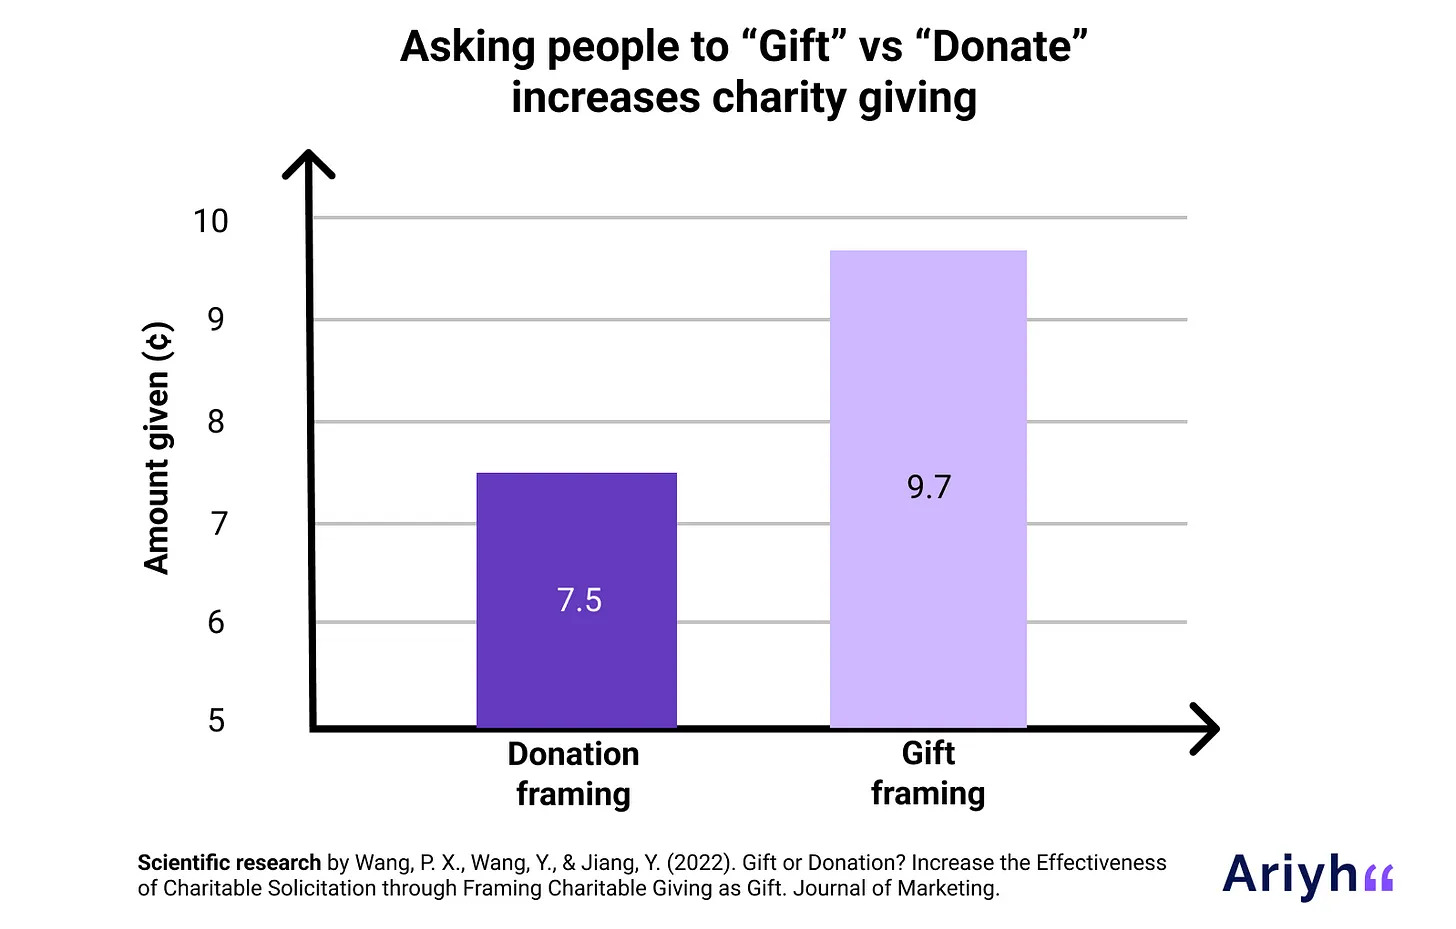 A graph depicting the amount given for donation framing vs gift framing shows that those who were asked to donate gave 7.5 vs those who were asked to gift who gave 9.7. 